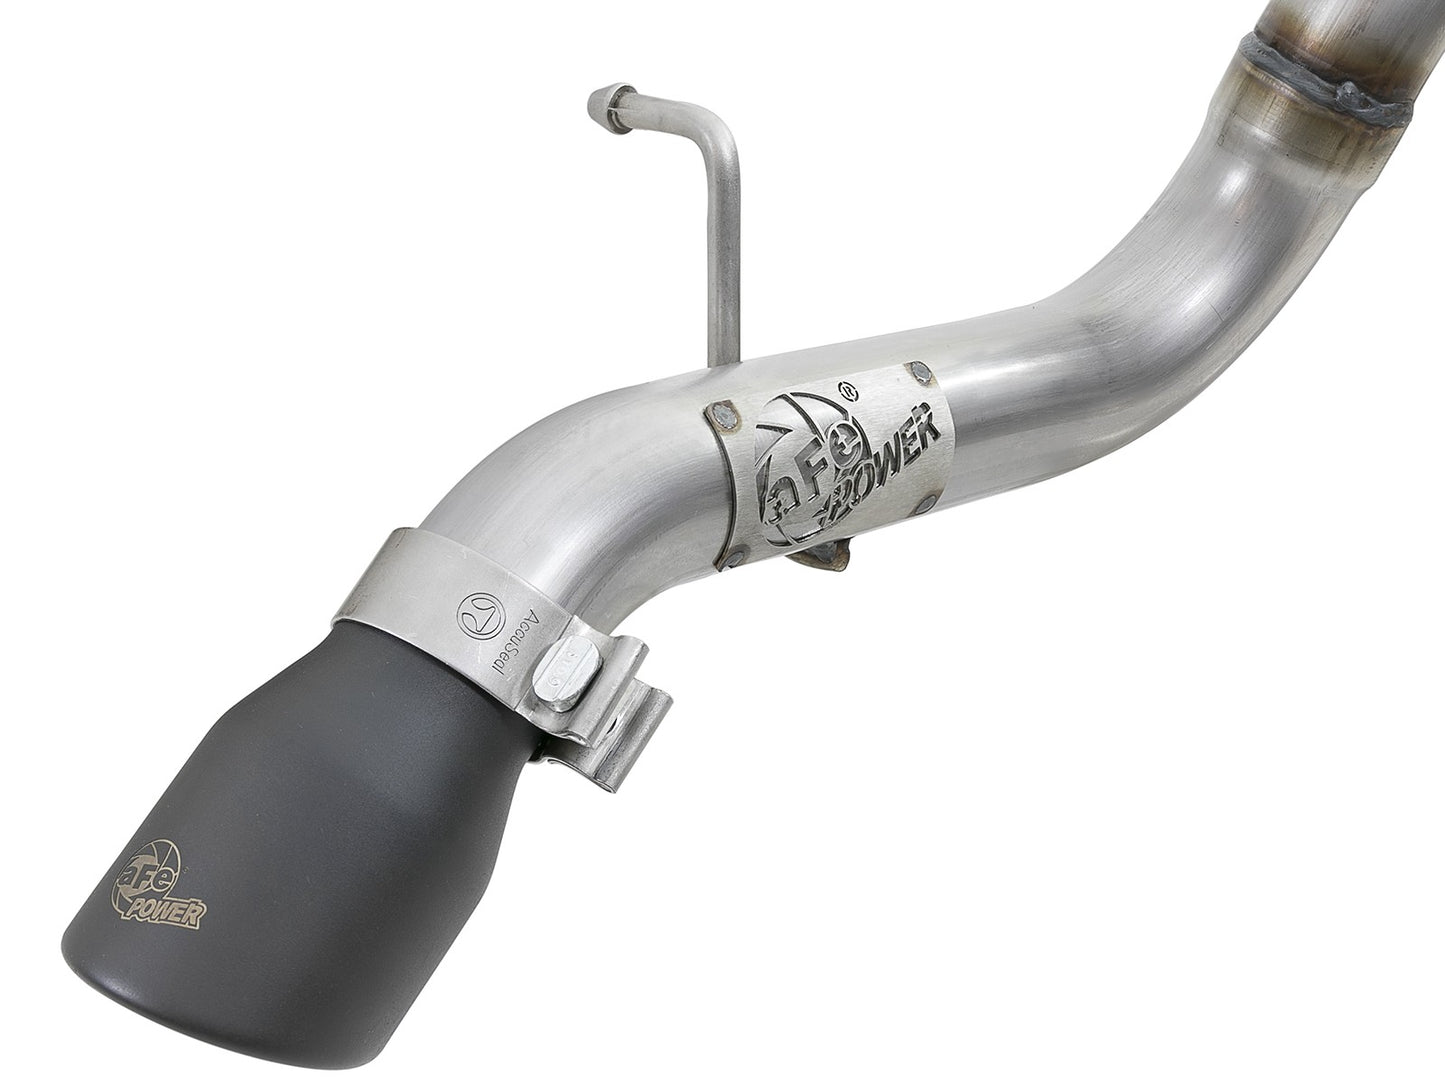 AFE POWER Mach Force-Xp 2-1/2" 409 Stainless Steel Catback Hi-Tuck Exhaust (Black Tip) System Jeep Wrangler (JL) 2018-2020